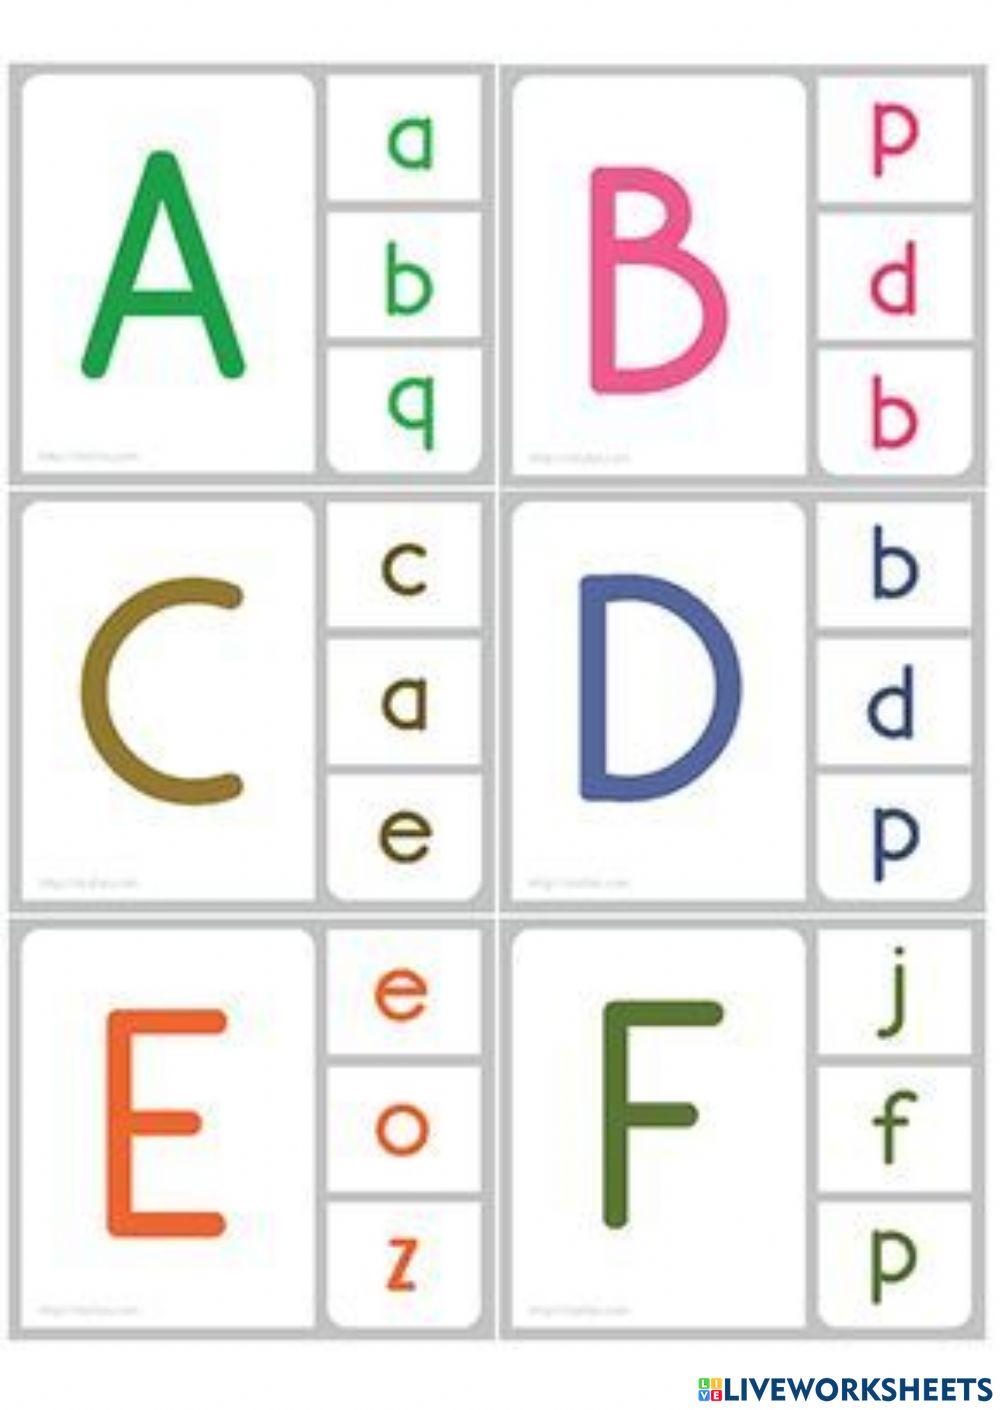 Choose the correct lowercase letters